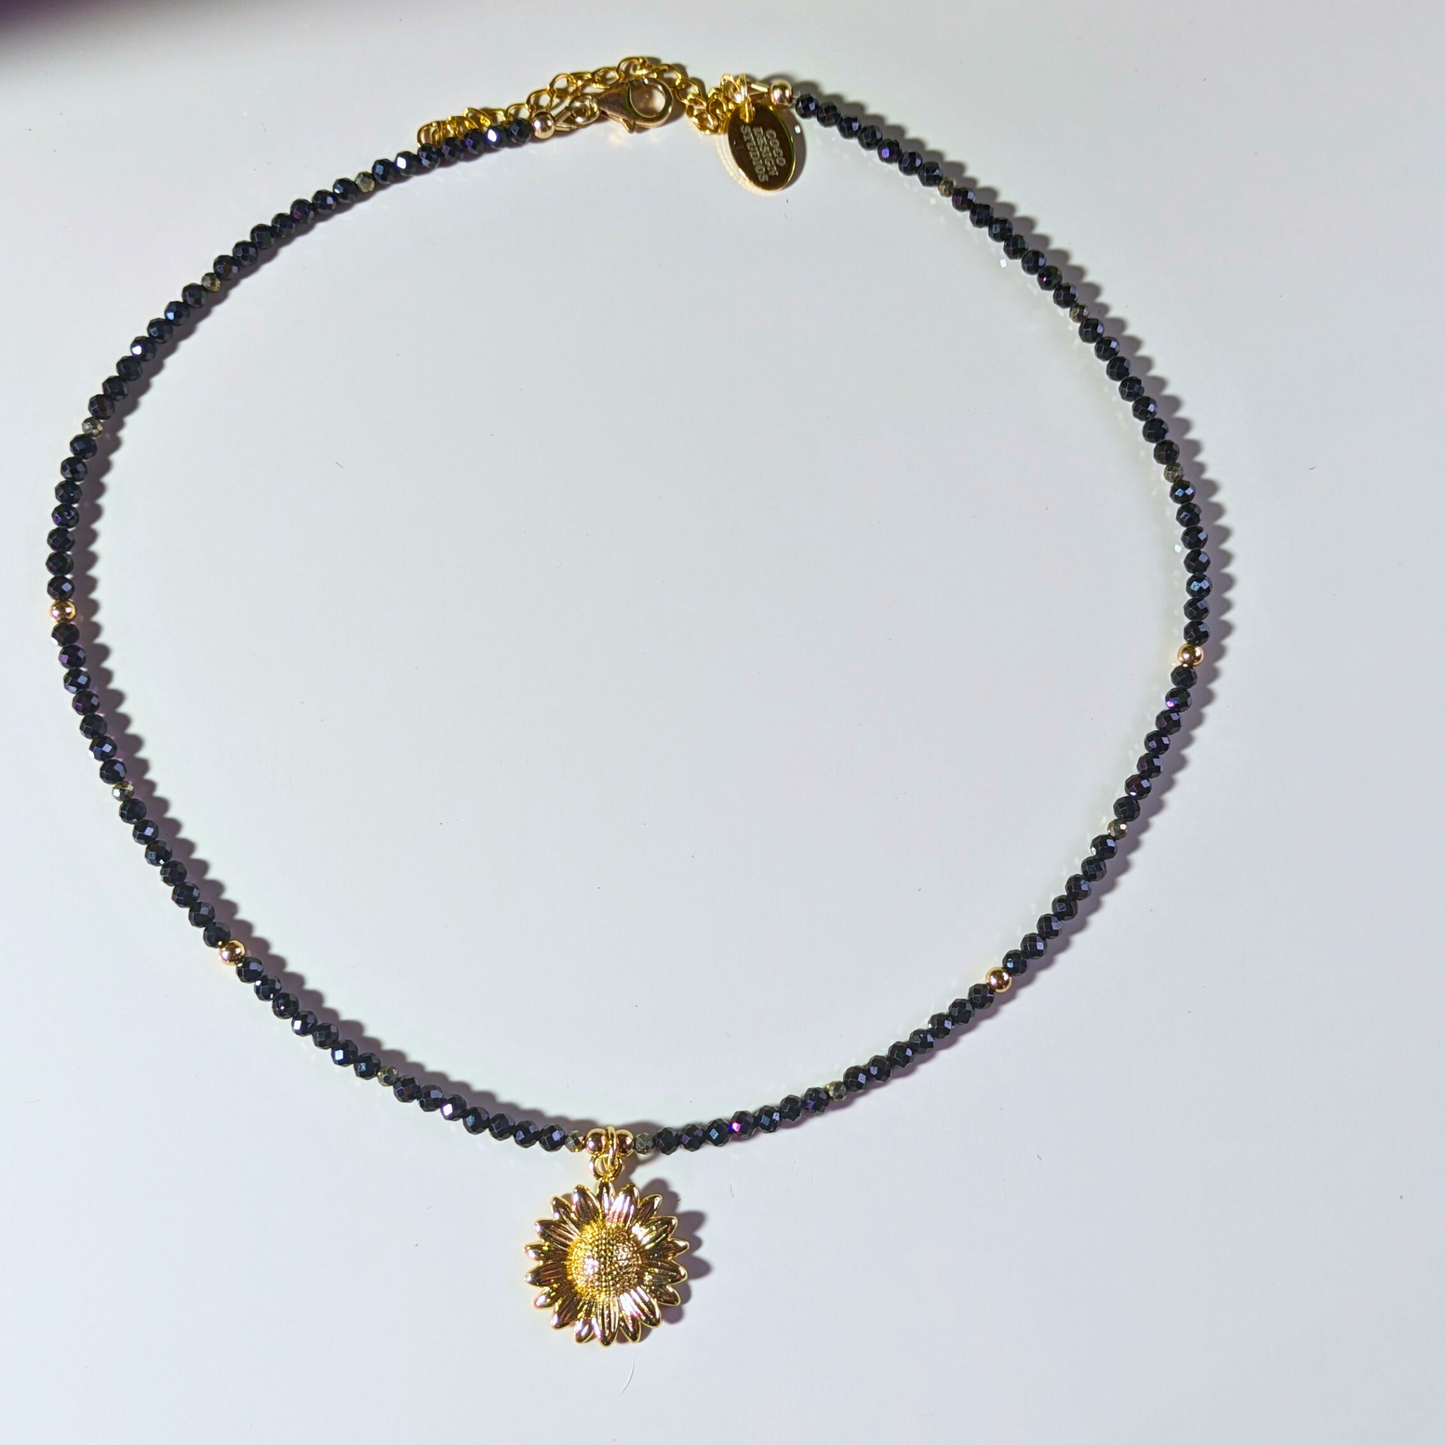 Gilded Blooms: Gold Filled Sunflower Pendant Necklace with Black Spinel